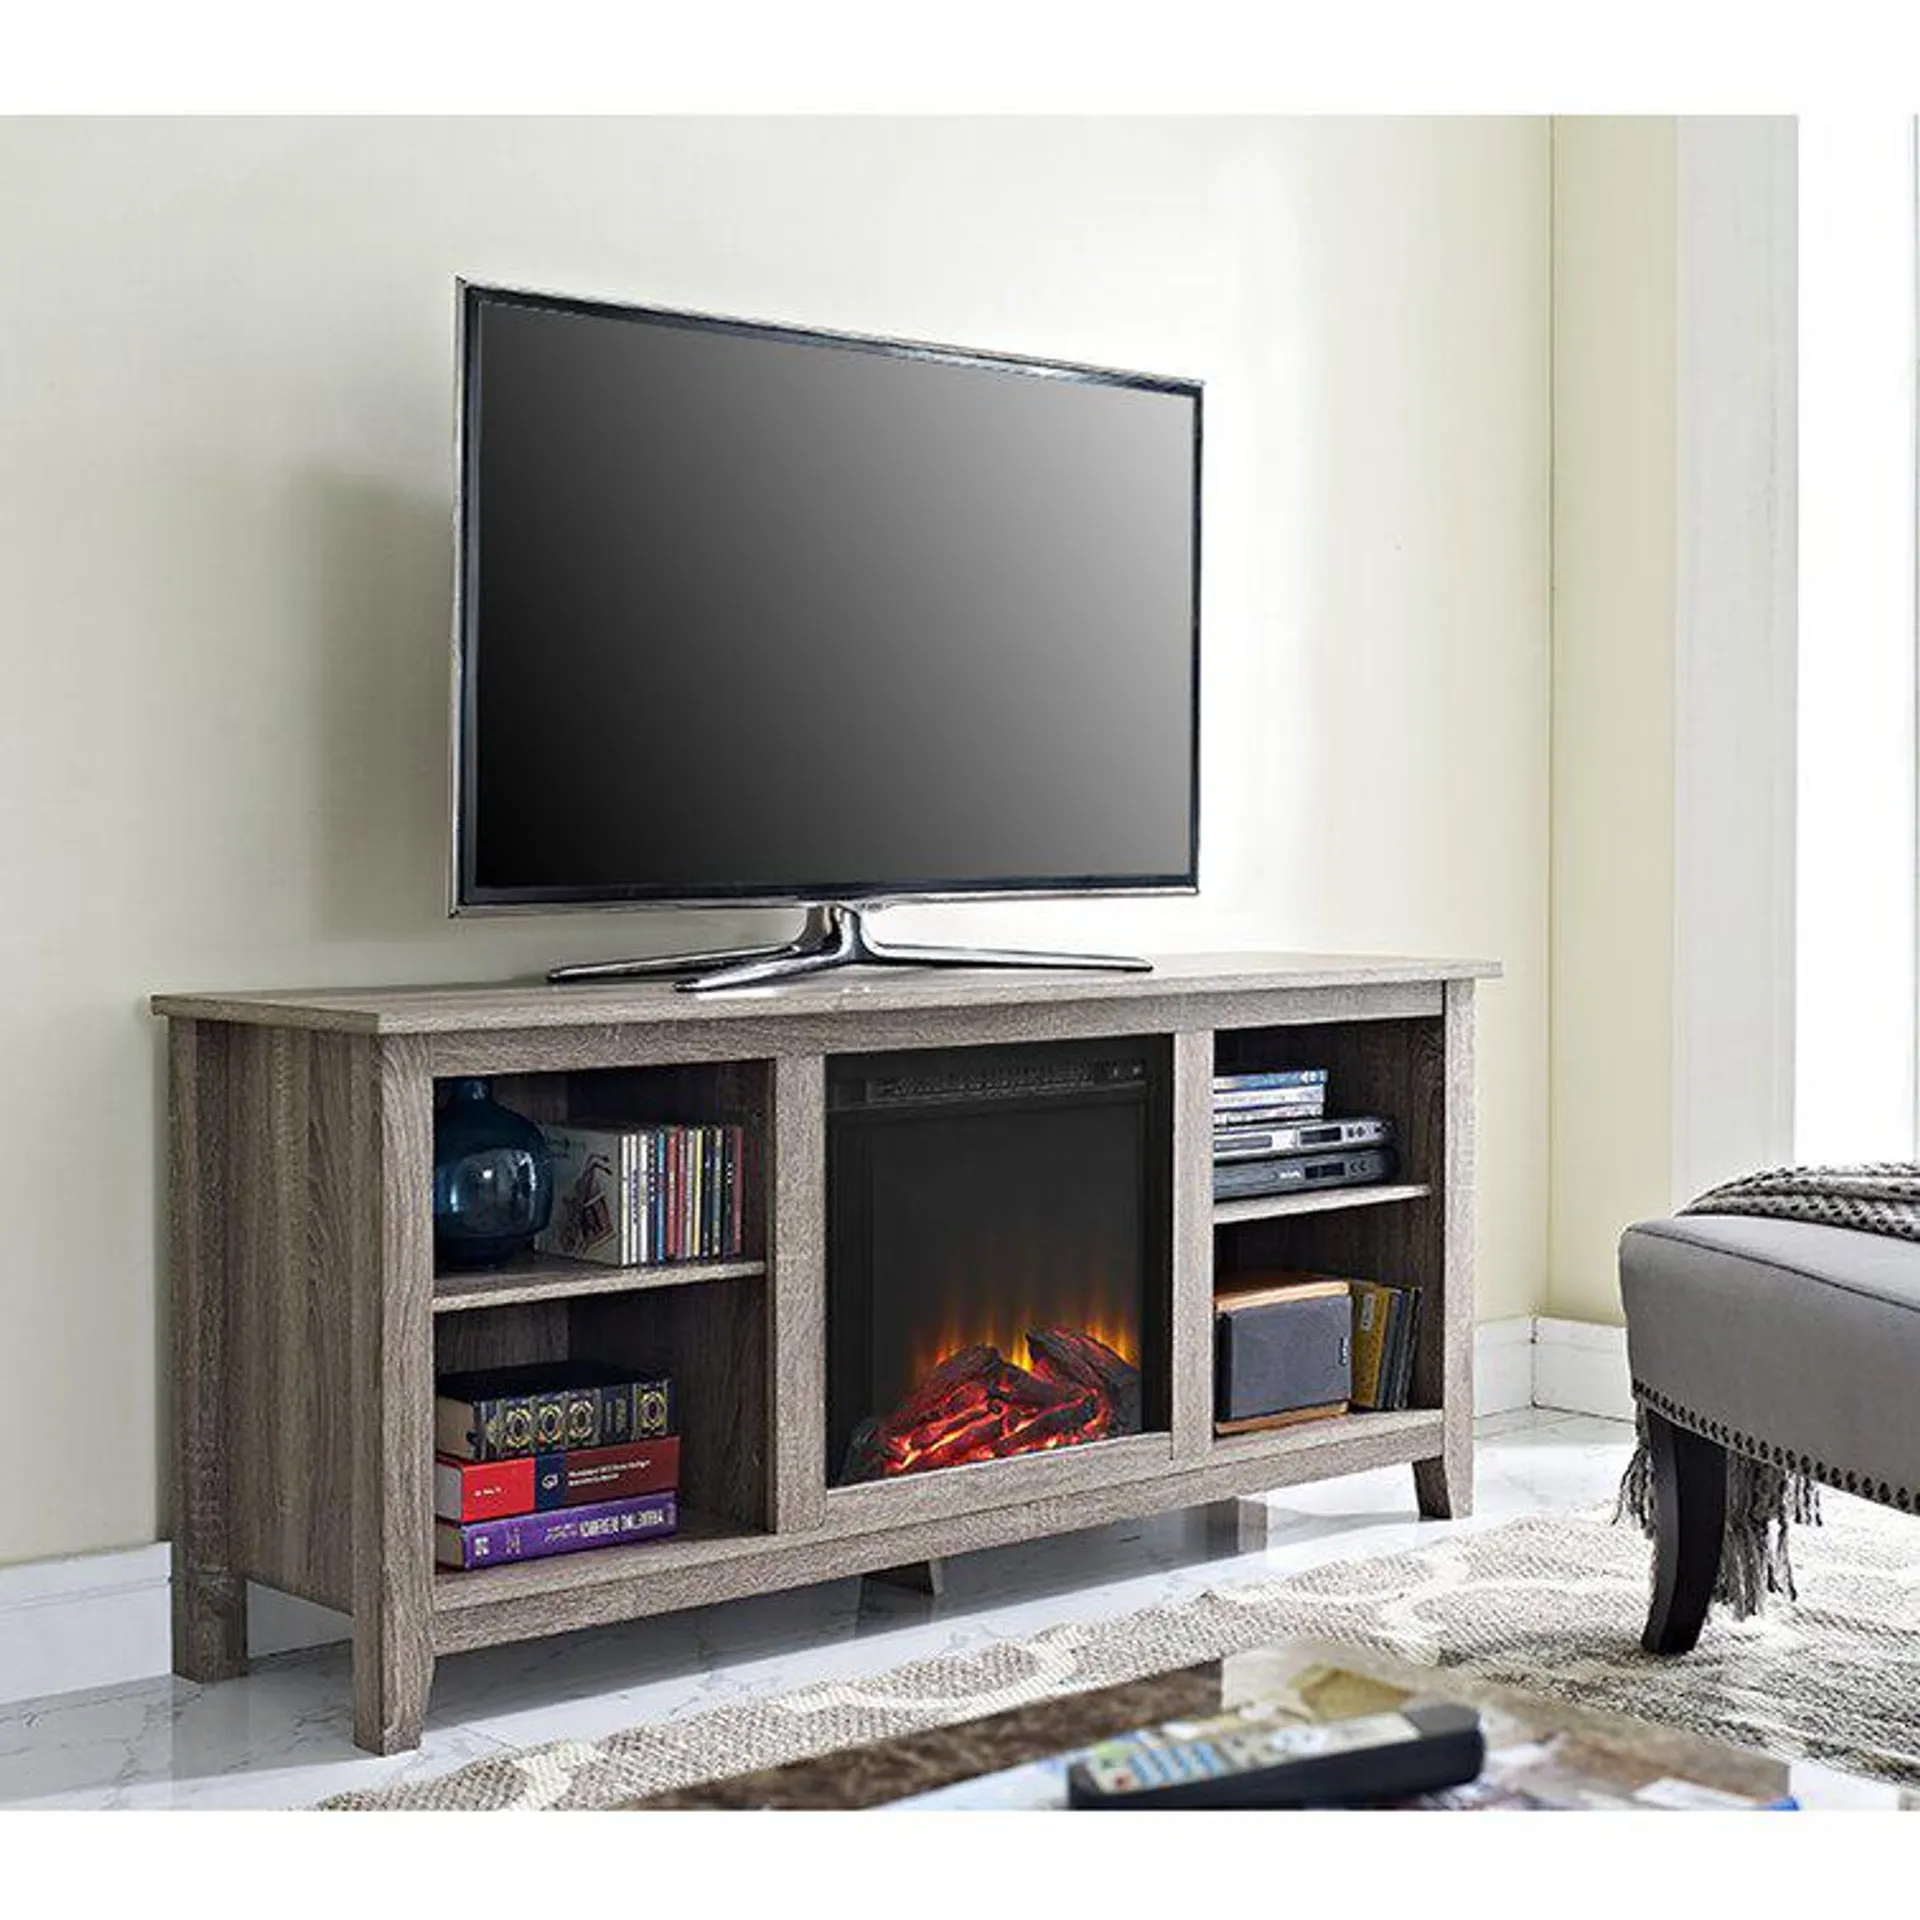 Kneeland TV Stand for TVs up to 65" with Fireplace Included